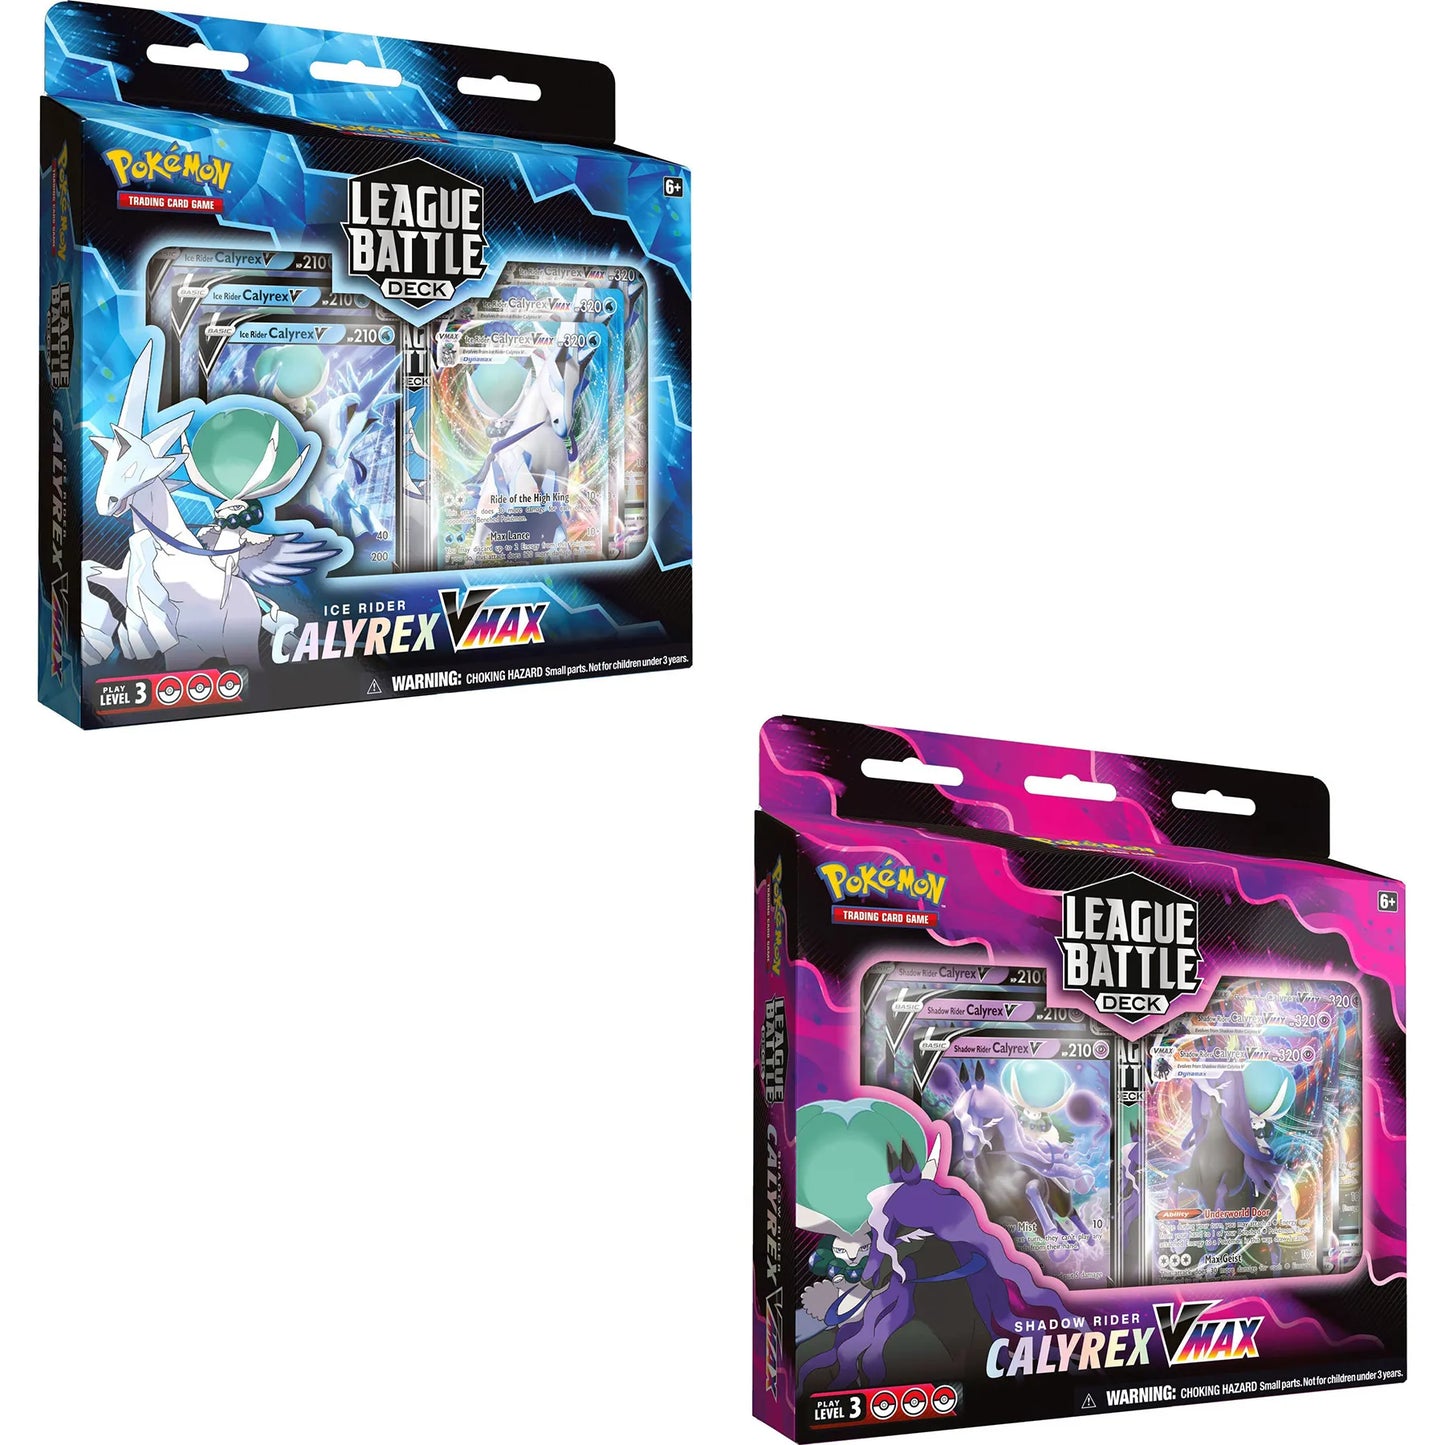 Pokemon Trading Card Game Box Sets League Battle Deck Featuring Shadow Rider Calyrex and Ice Rider Calyrex